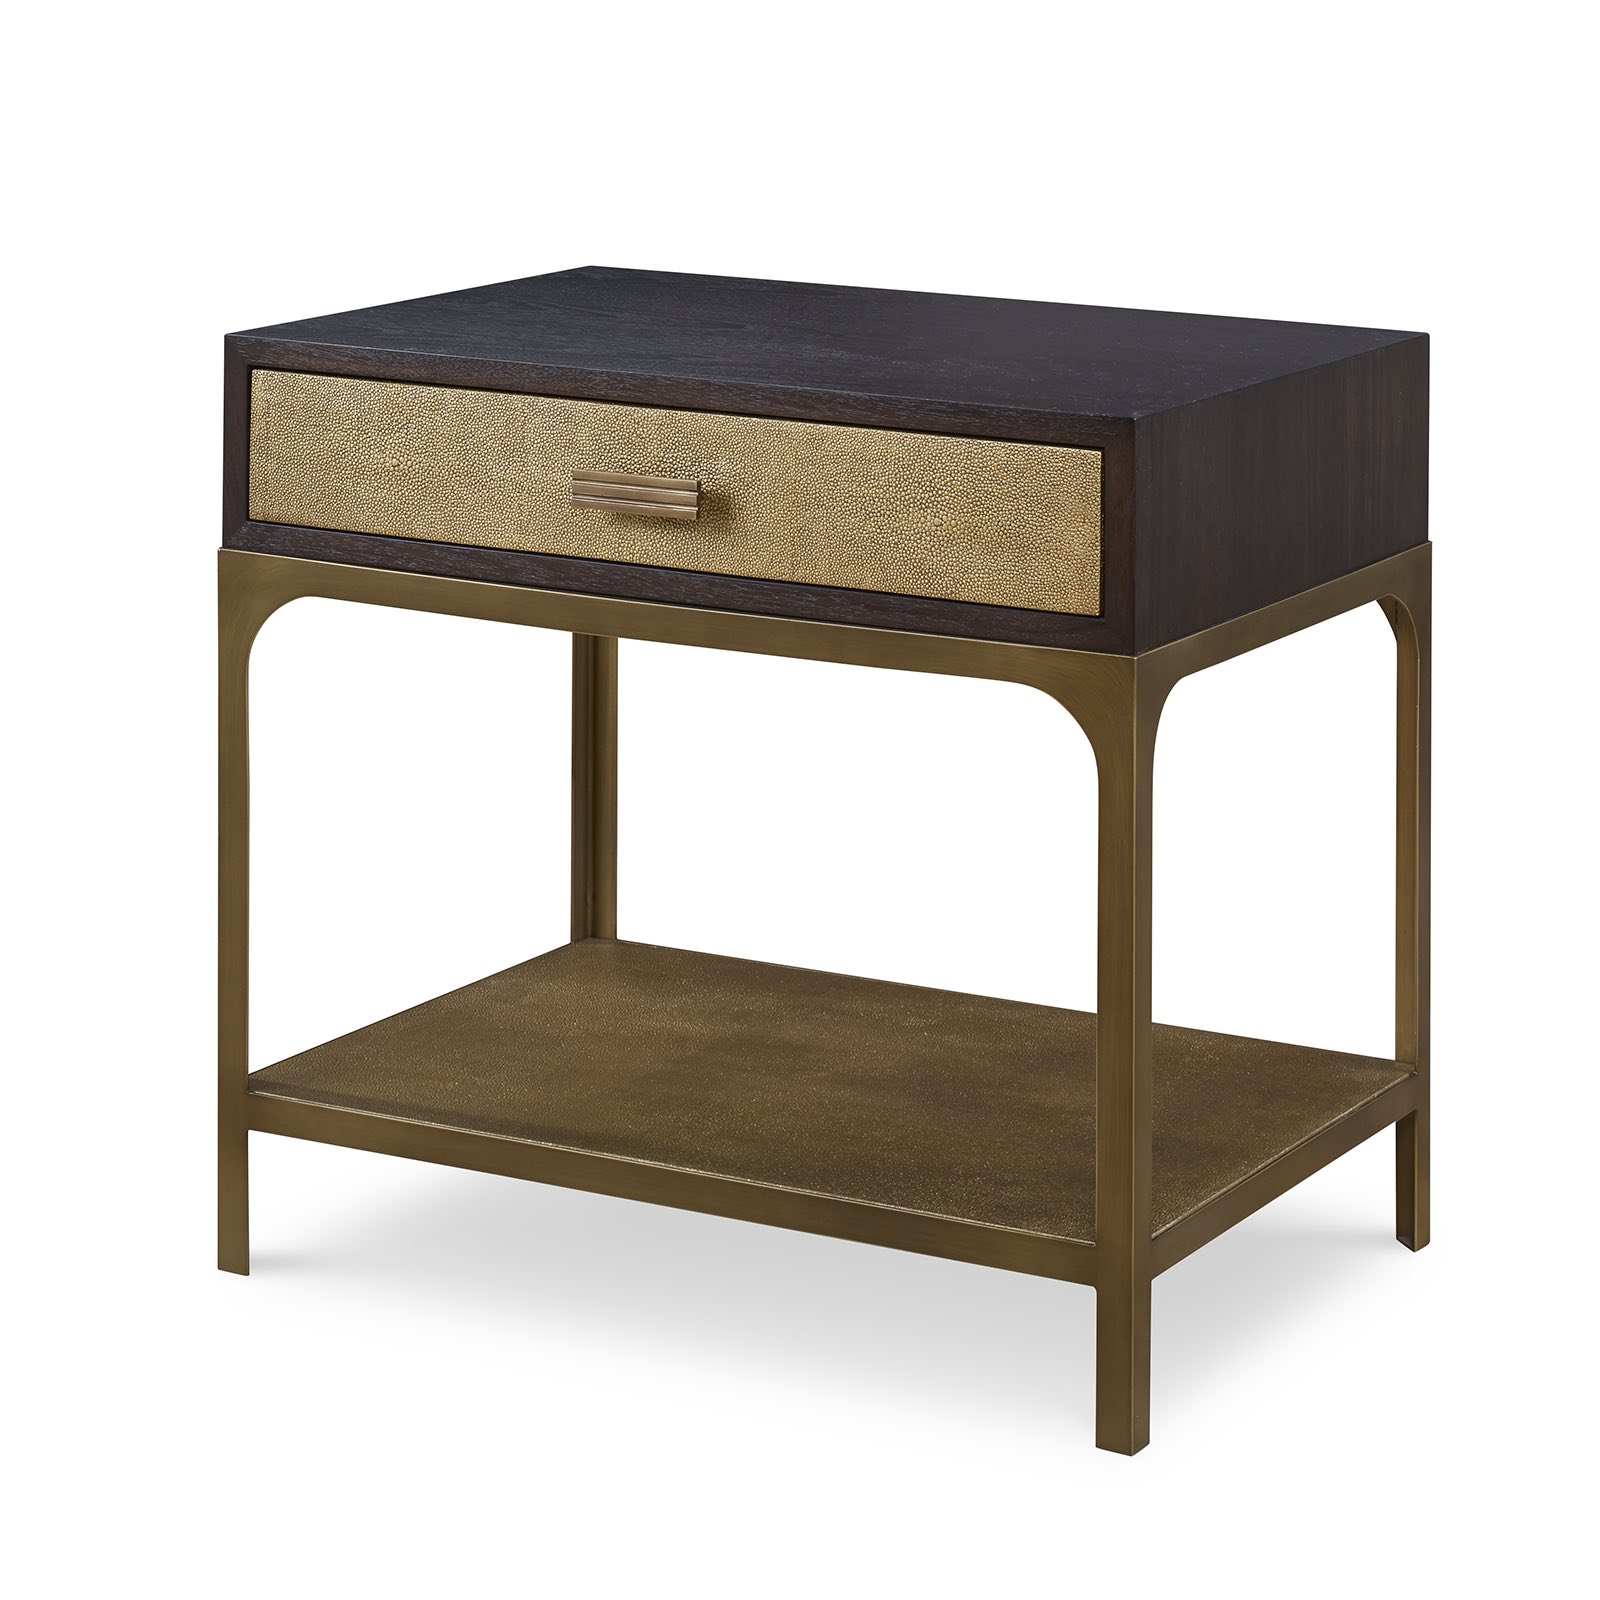 Mr Brown London Holmby bedside table